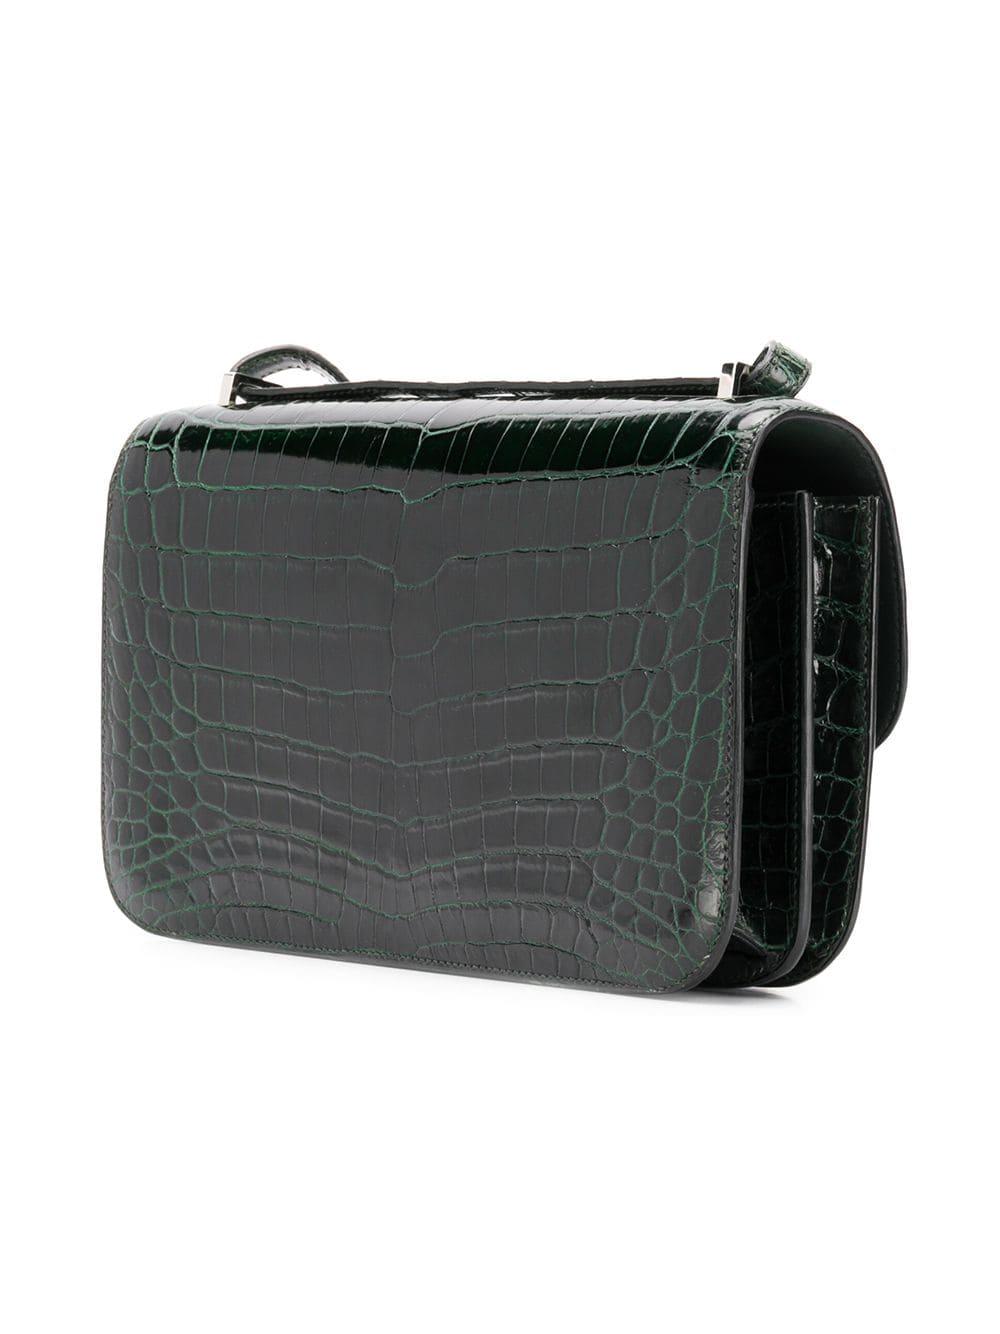 This 25cm Constance Elan shoulder bag from Hermès was meticulously crafted in France from a highly precious Niloticus crocodile in a deep shade of forest green. Offset with silver-tone palladium-plated hardware, its slender body is adorned with the